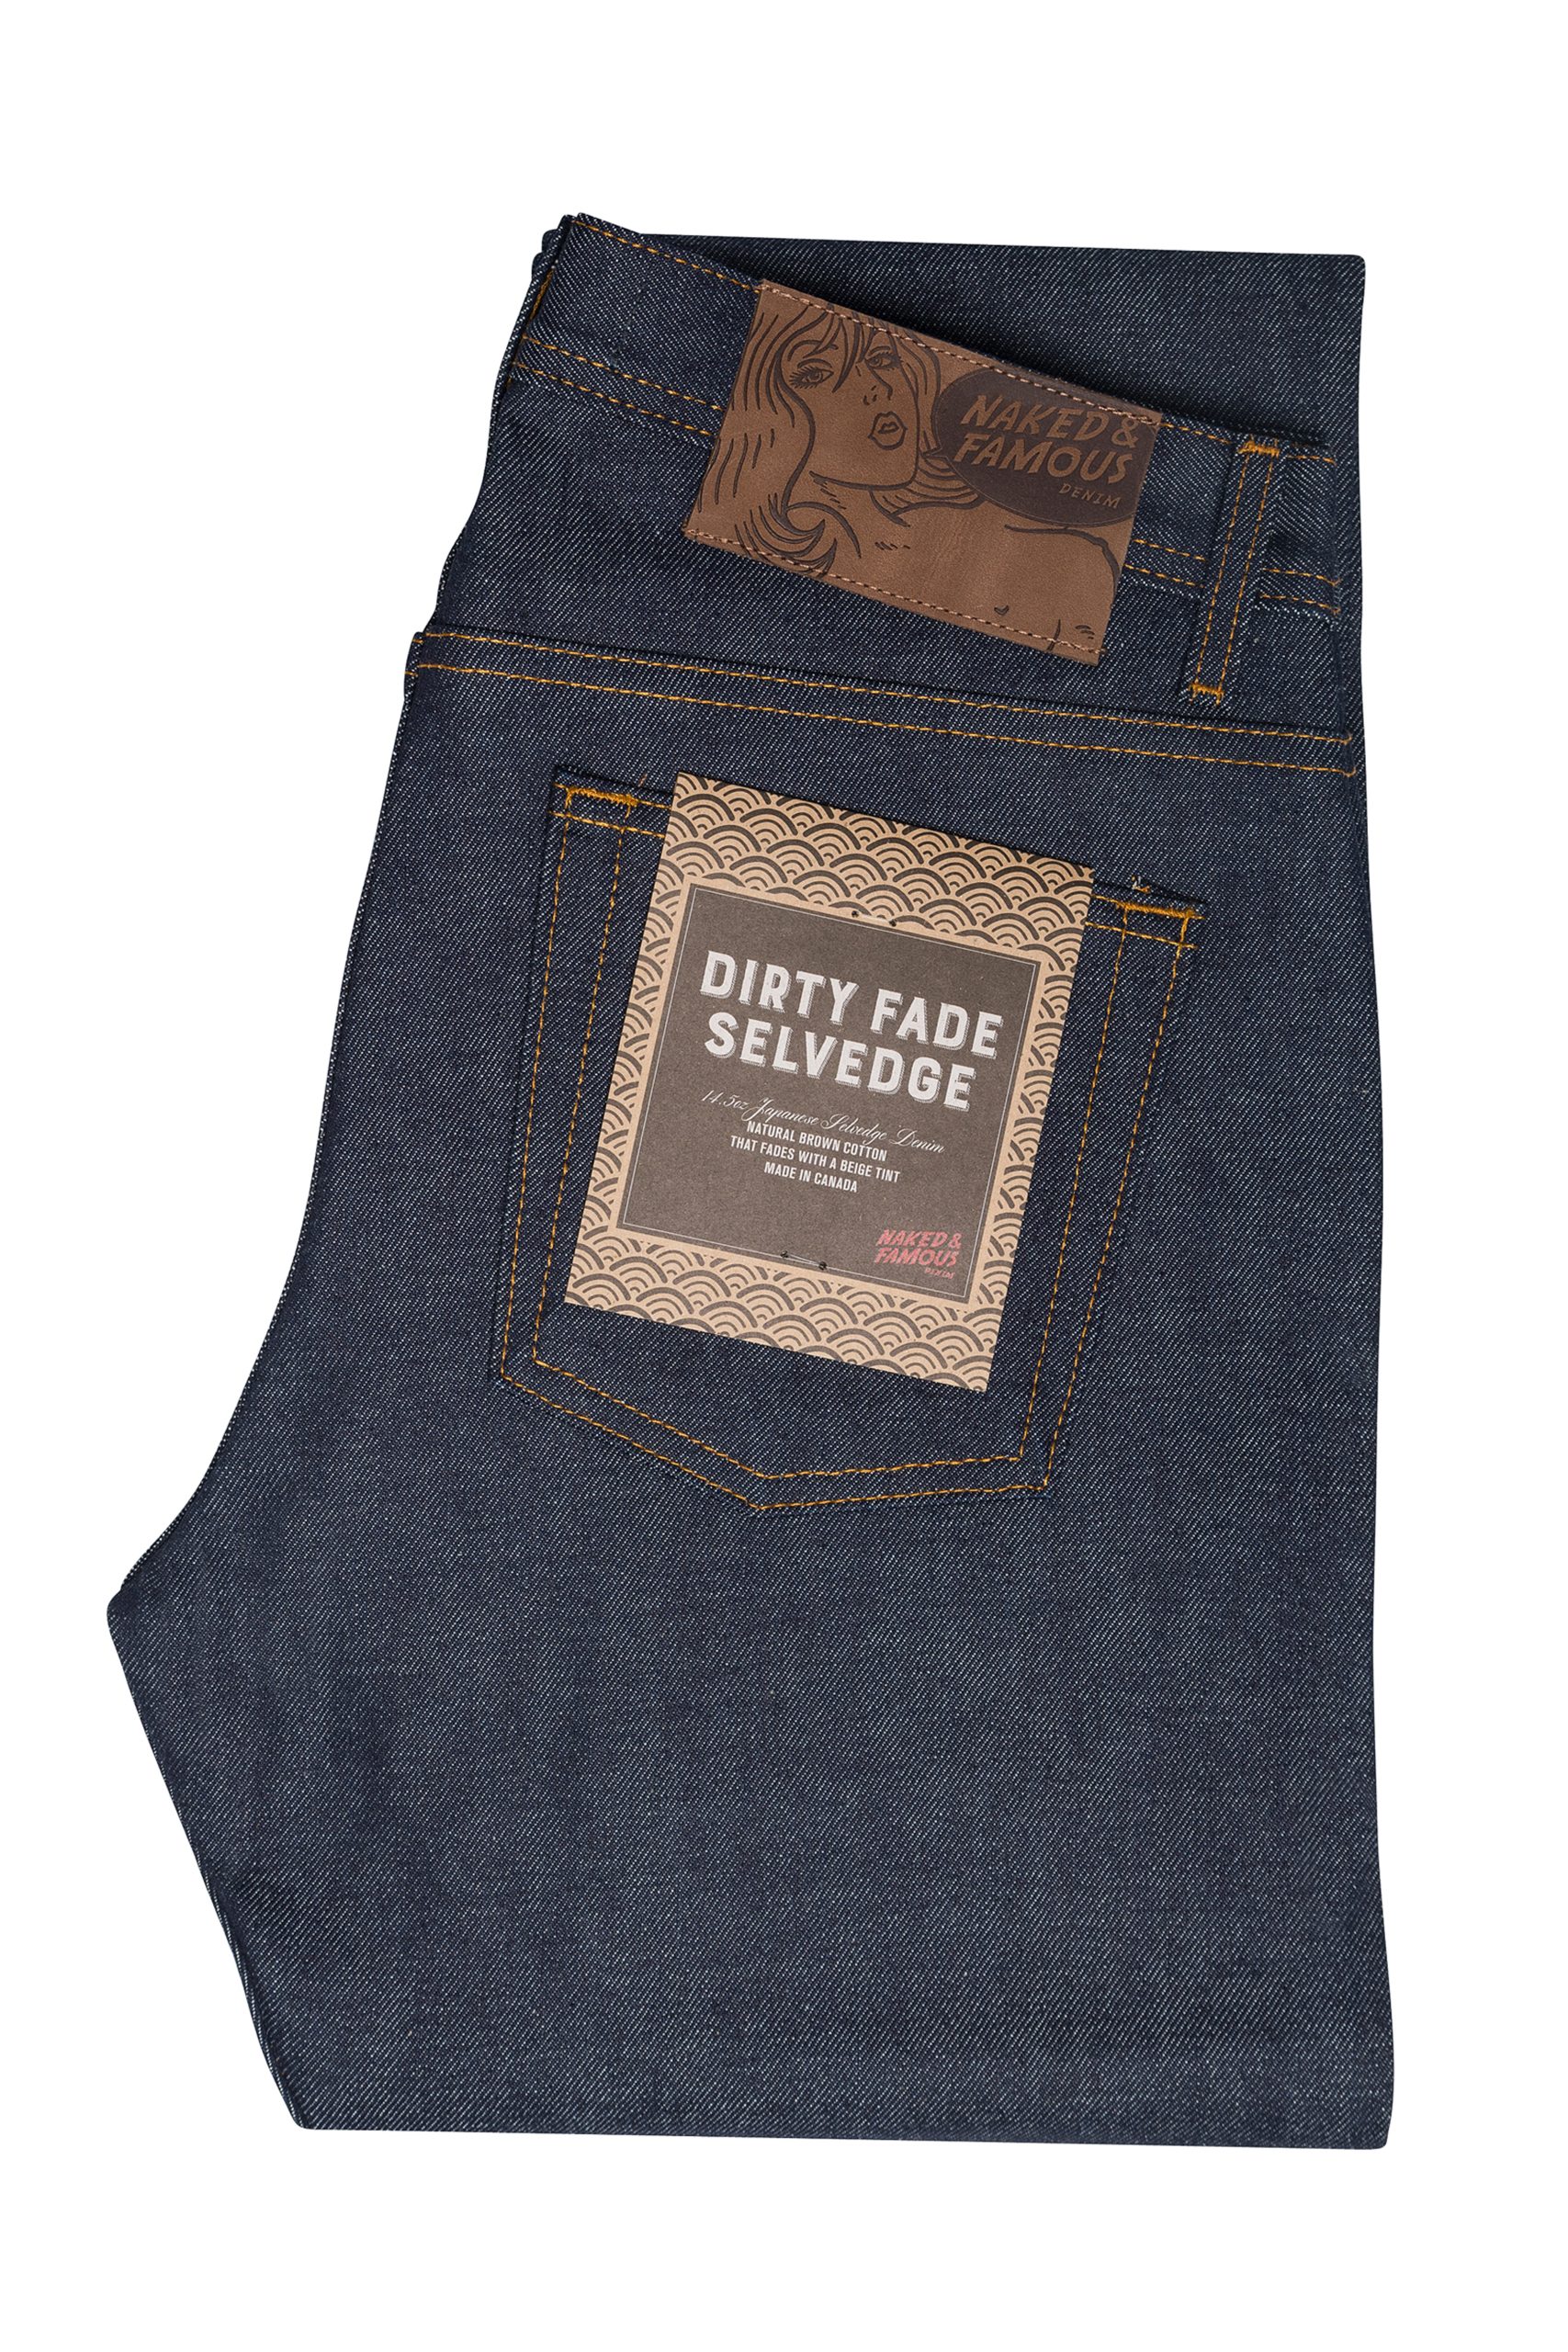 NAKED and FAMOUS Jeans Weird guy DIRTY FADE SELVEDGE